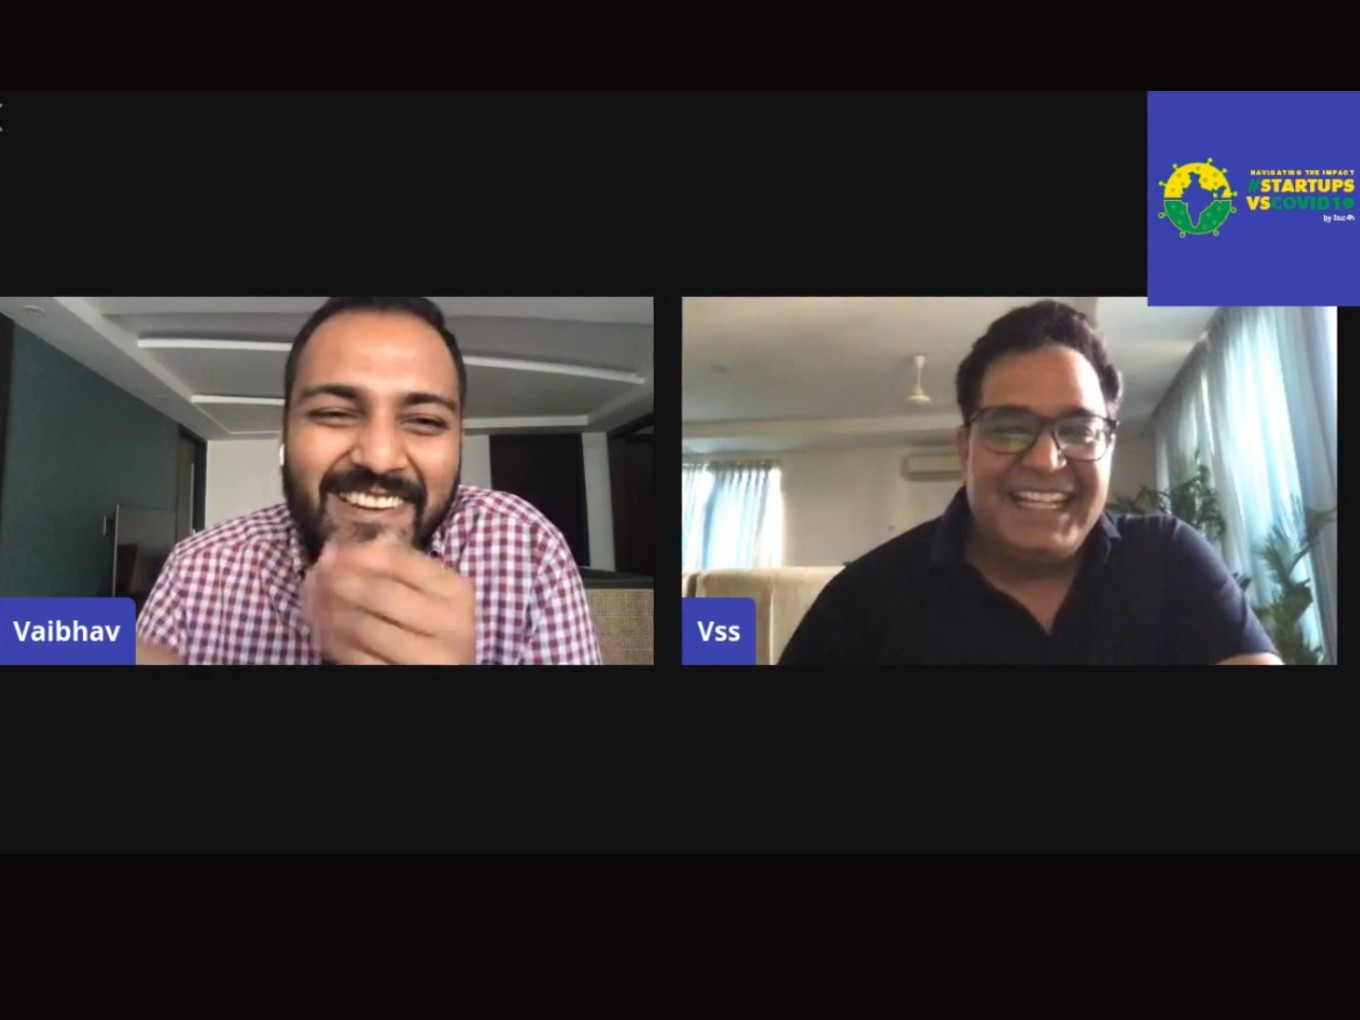 Covid19: Vijay Shekhar Sharma On The Rise Of Gaming And The Big Offline-To-Online Migration